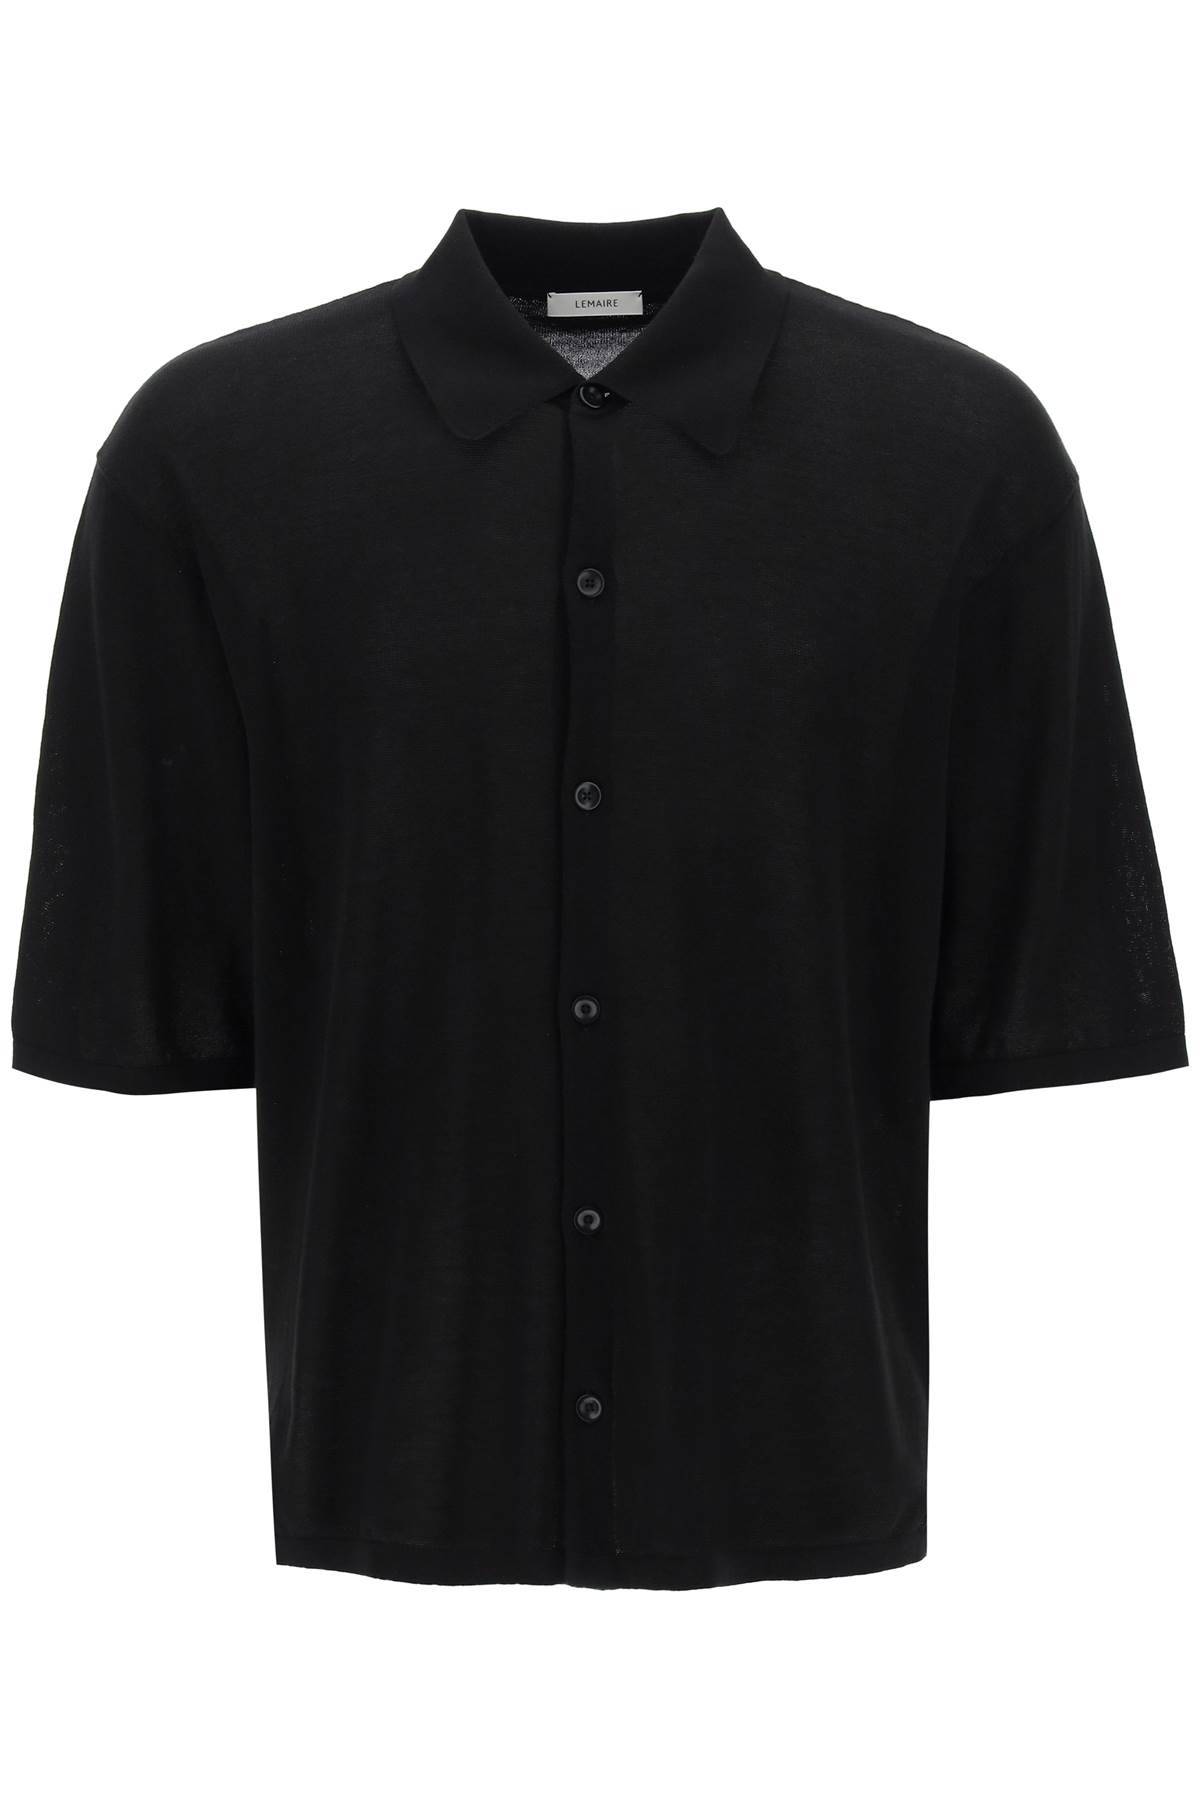 Lemaire LEMAIRE short-sleeved knit shirt for